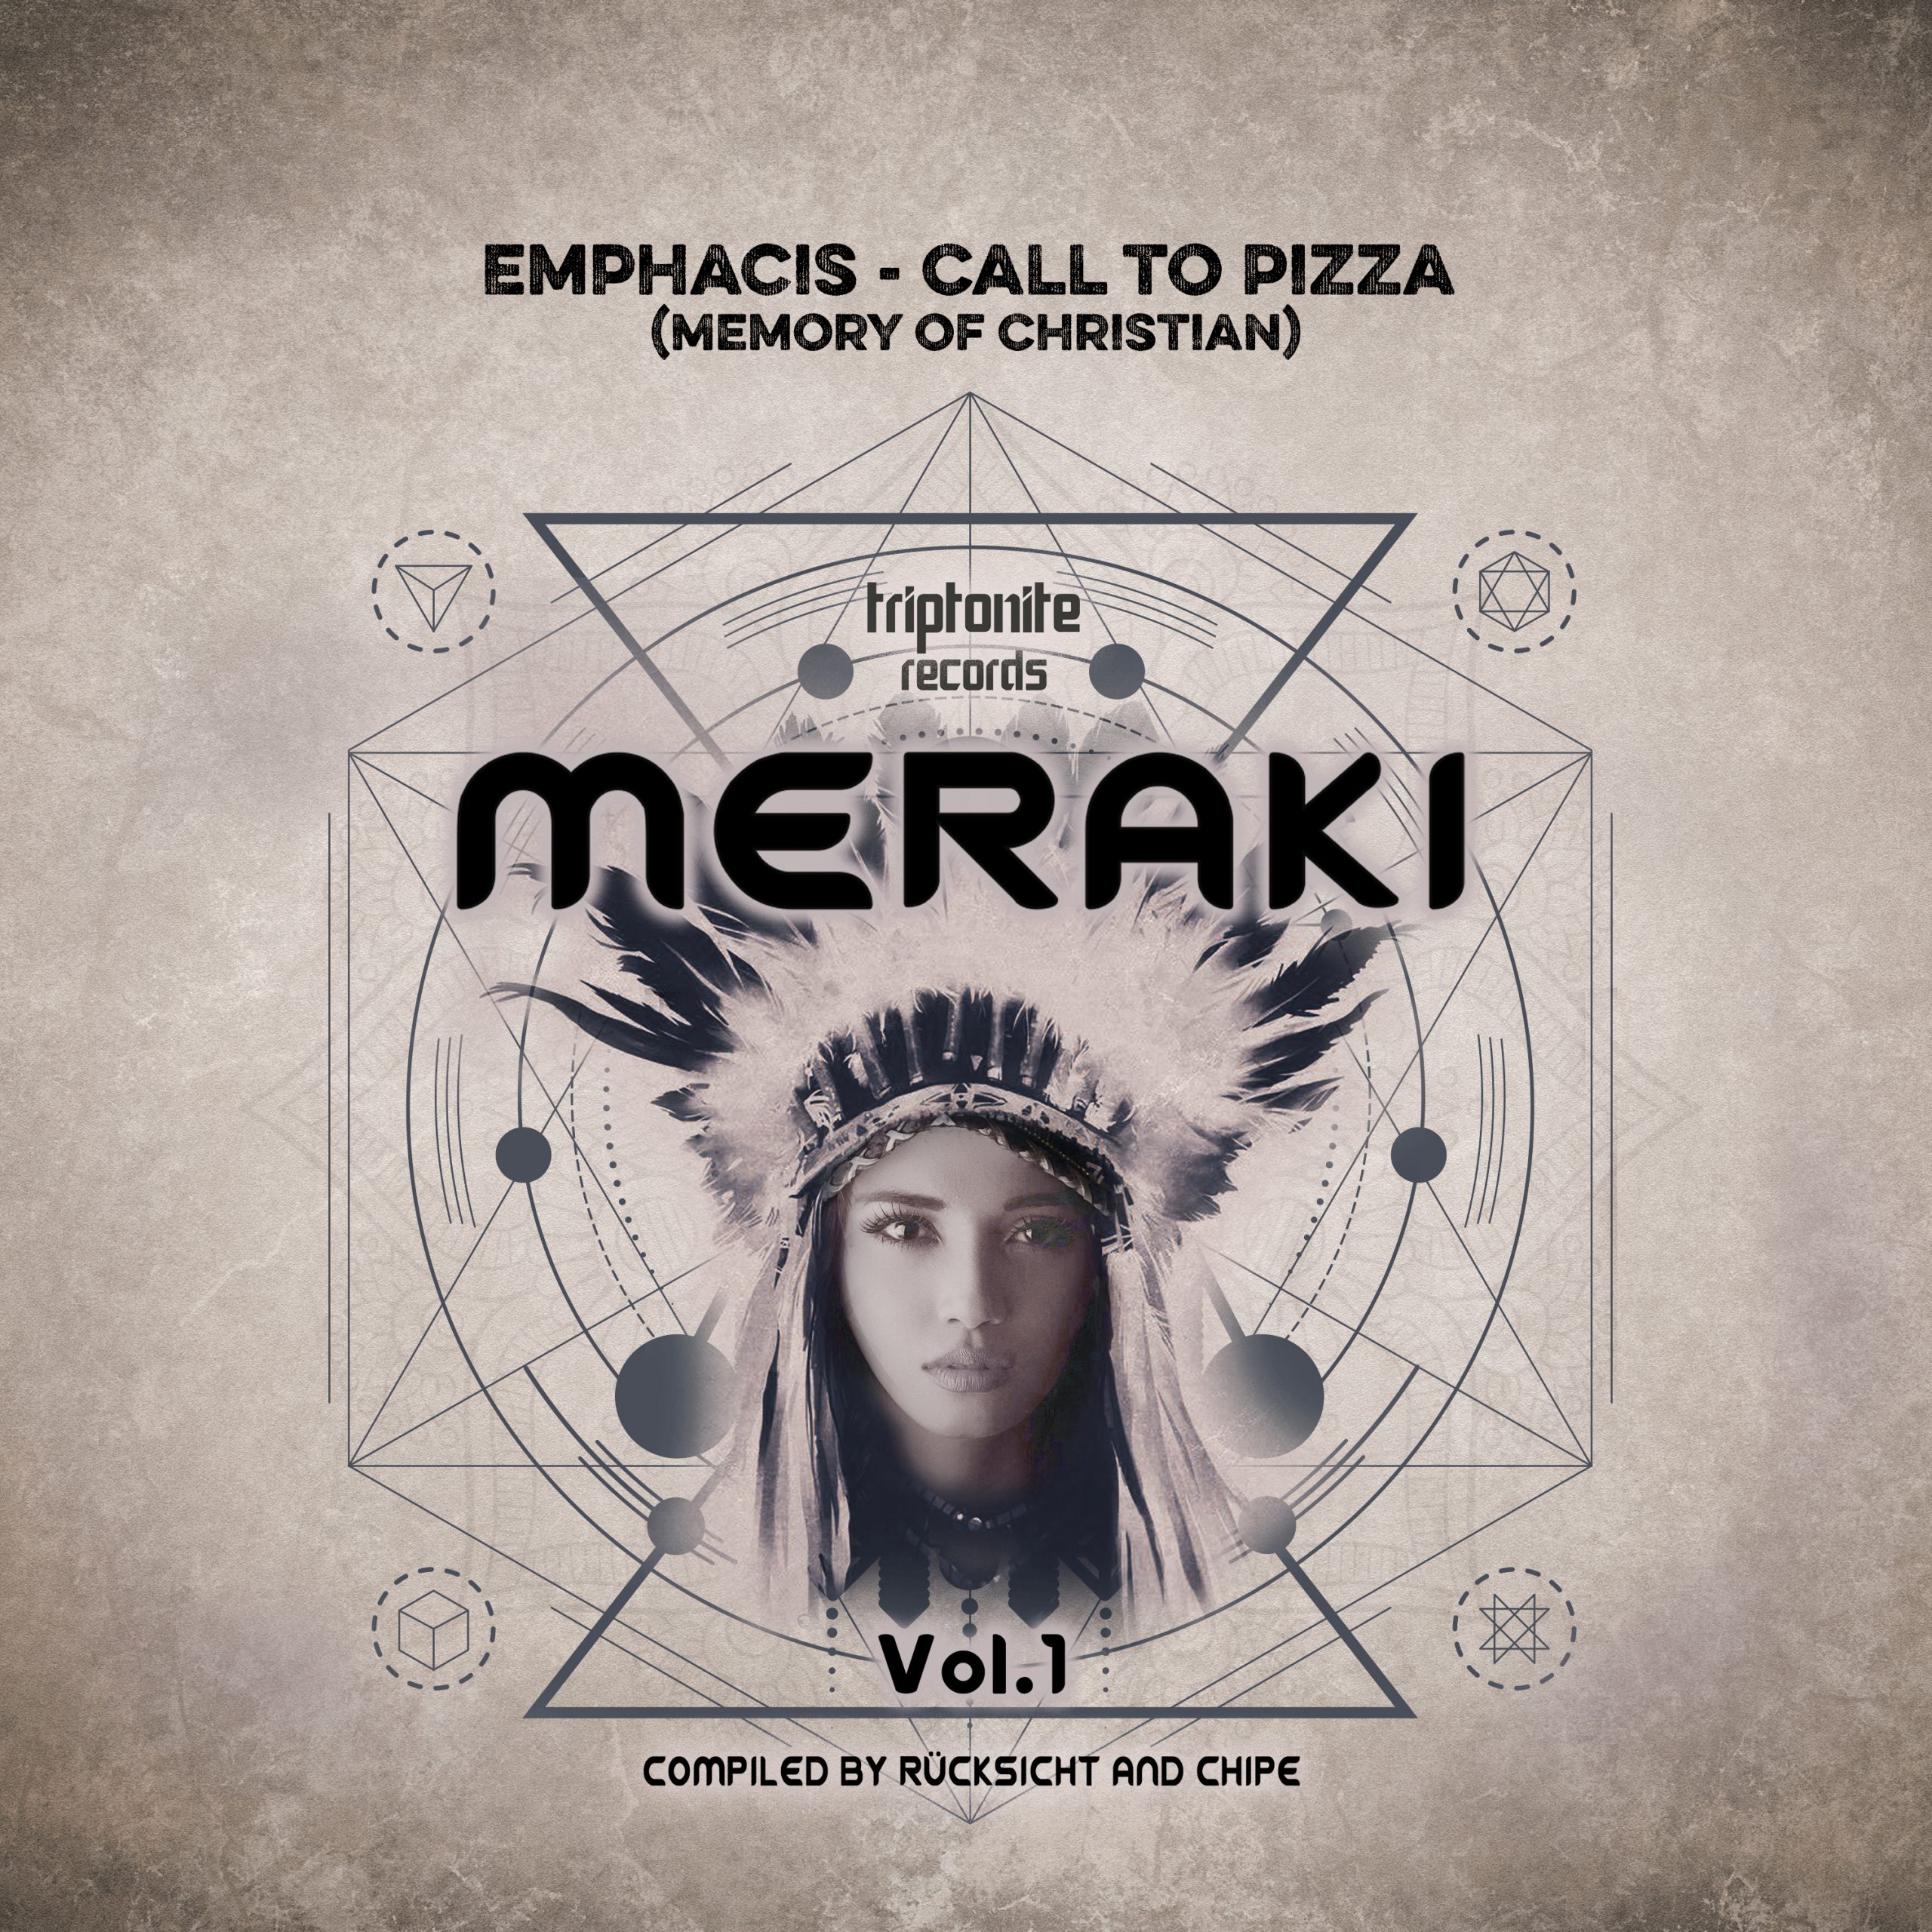 Emphacis - Call to Pizza (Memory of Christian)